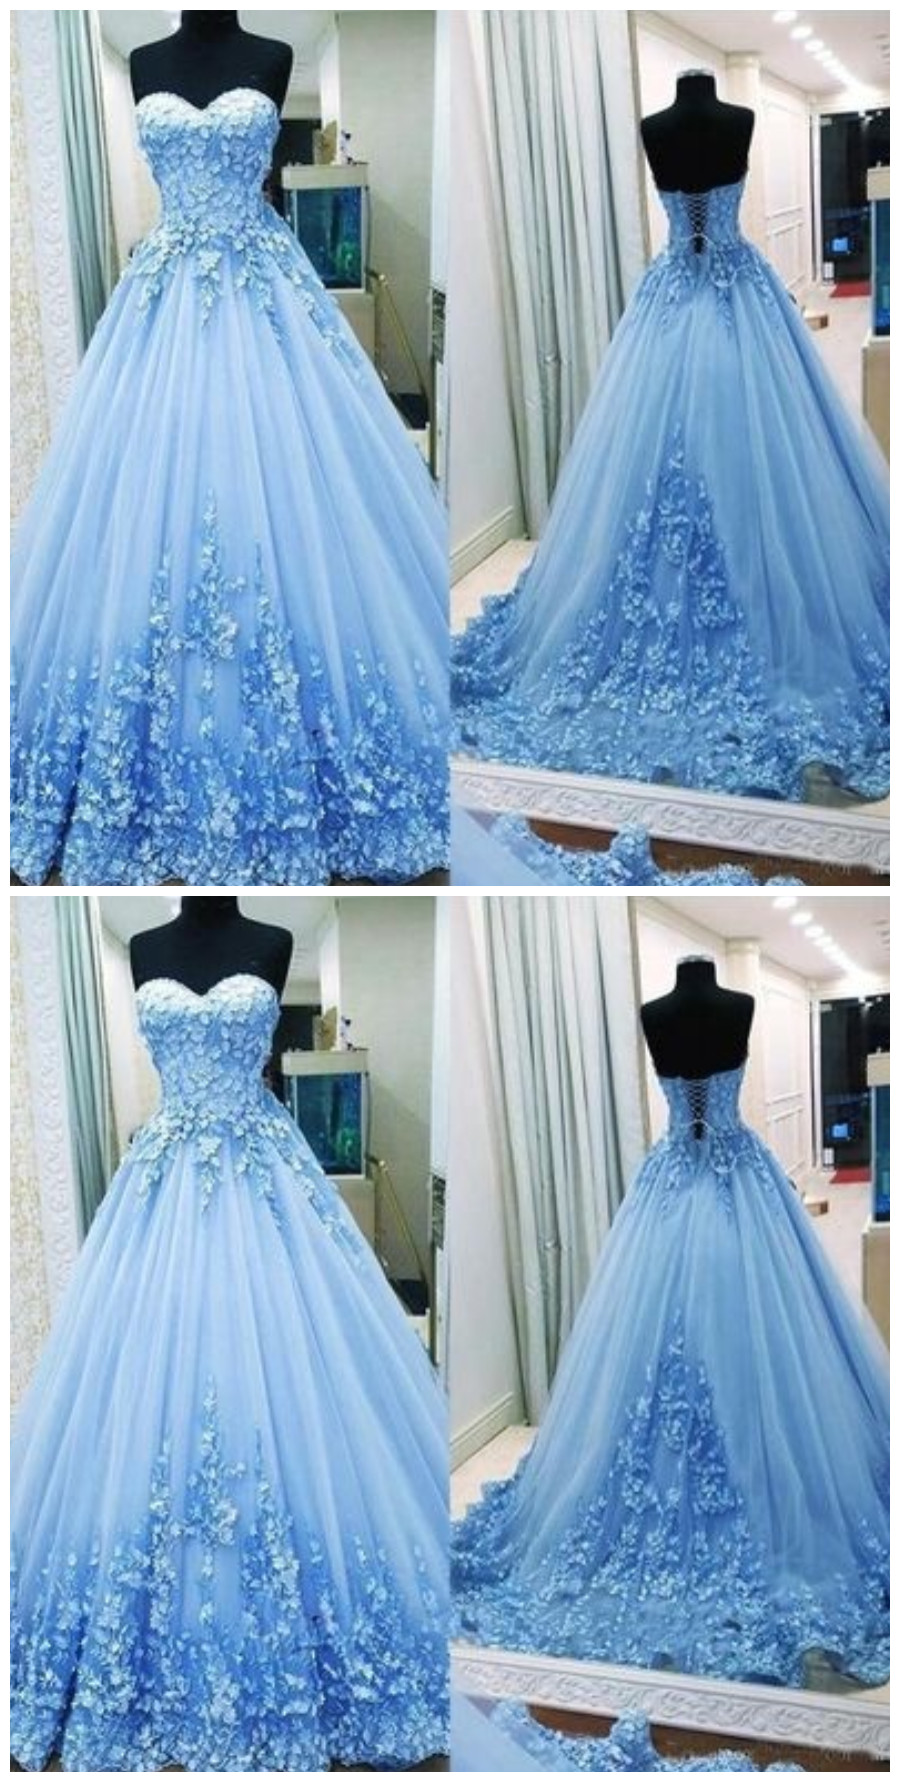 Lace Applique Prom Dresses Ball Gown Sweetheart Neckline Elegant ...